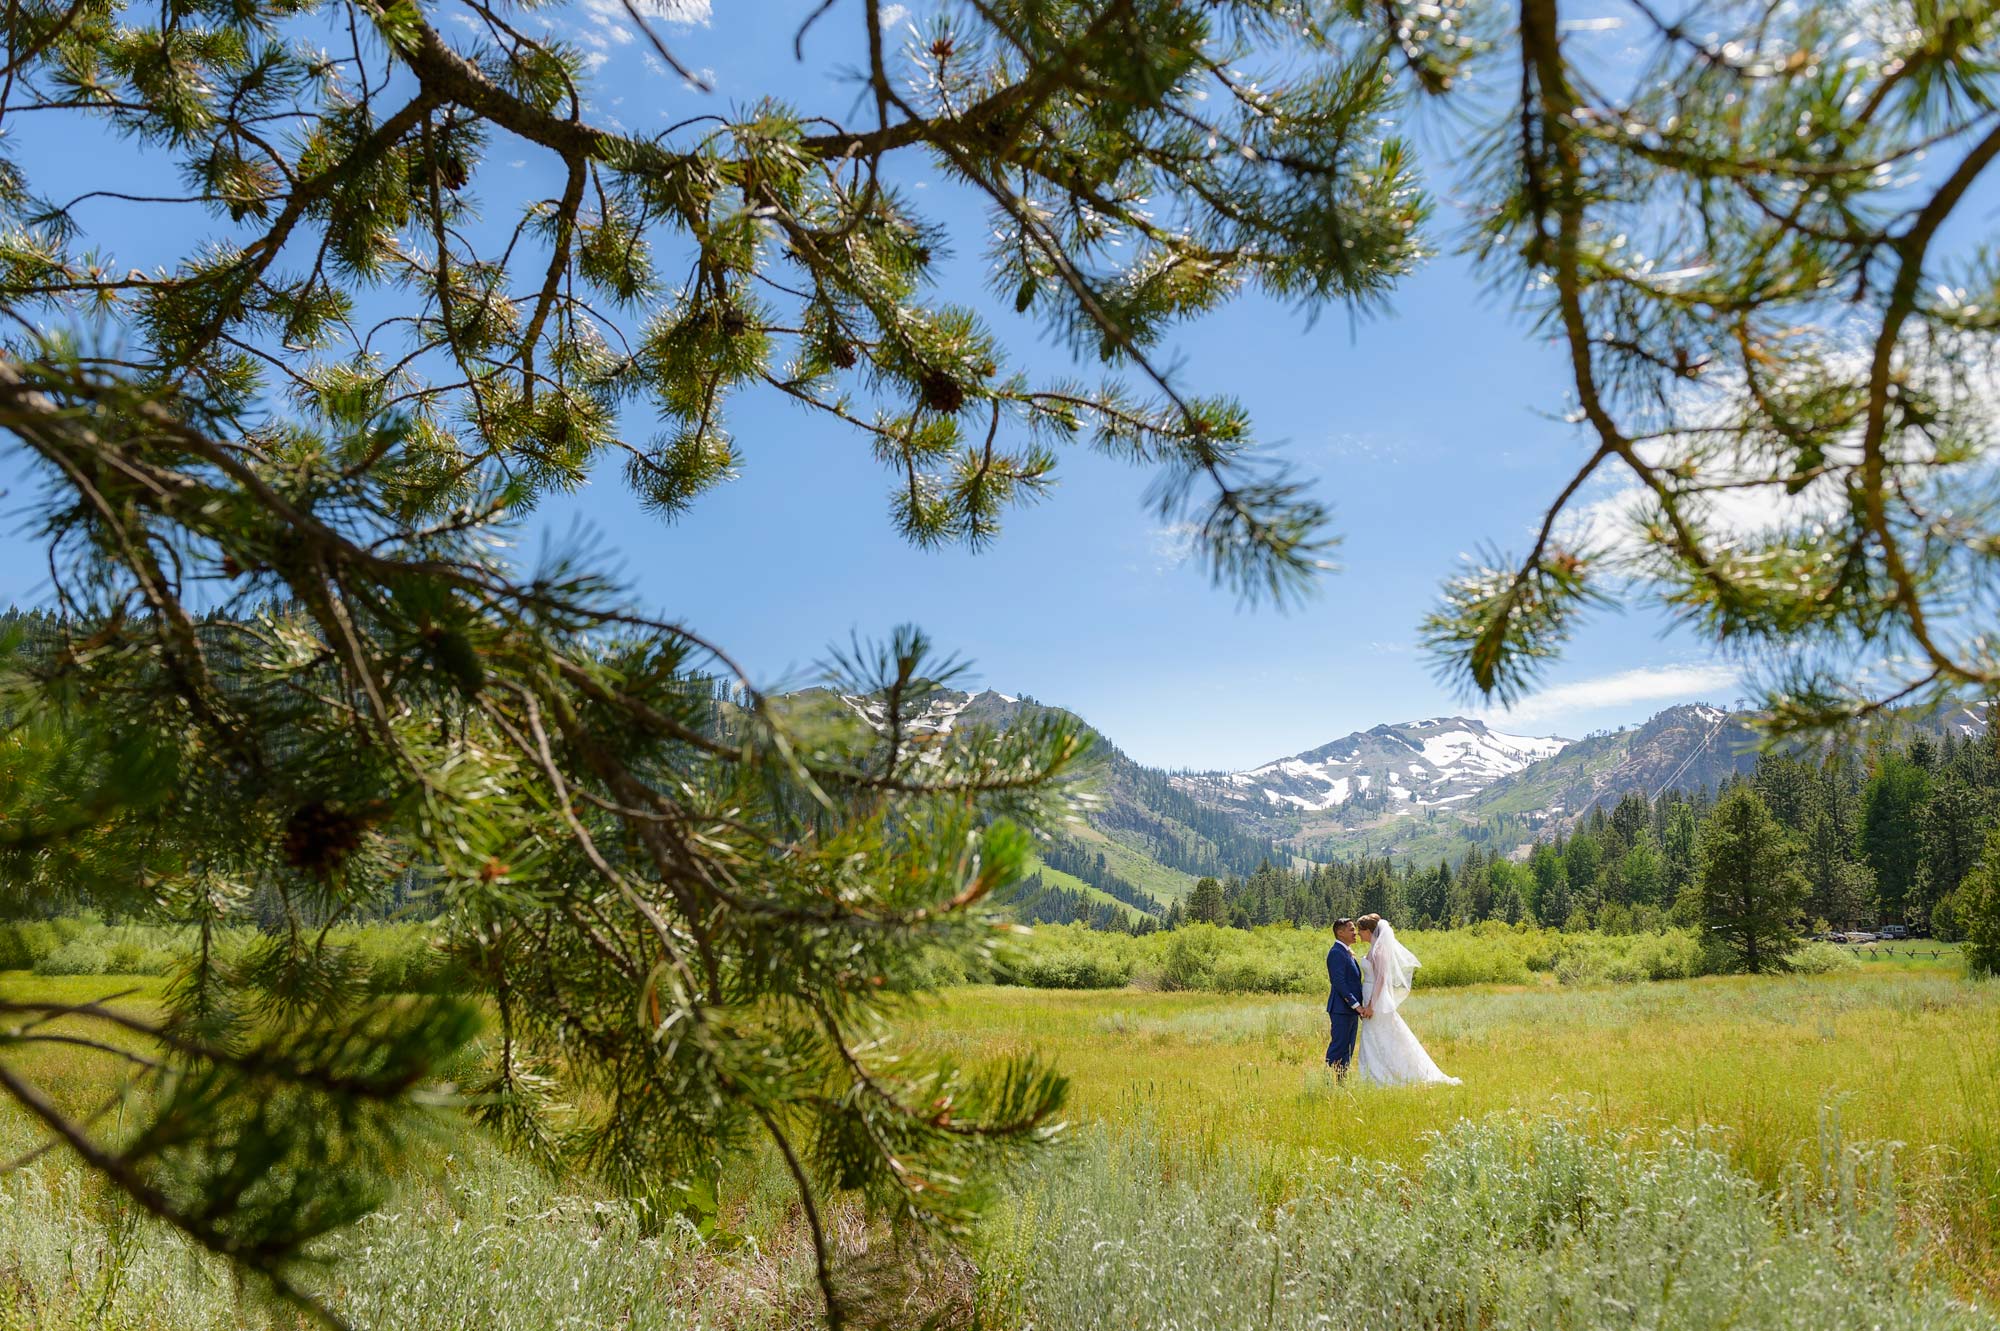 Wedding photograph of a couple in a field at Squaw Valley, California, surrounded by mountains and trees for thier Olympic Village Lodge wedding photography.